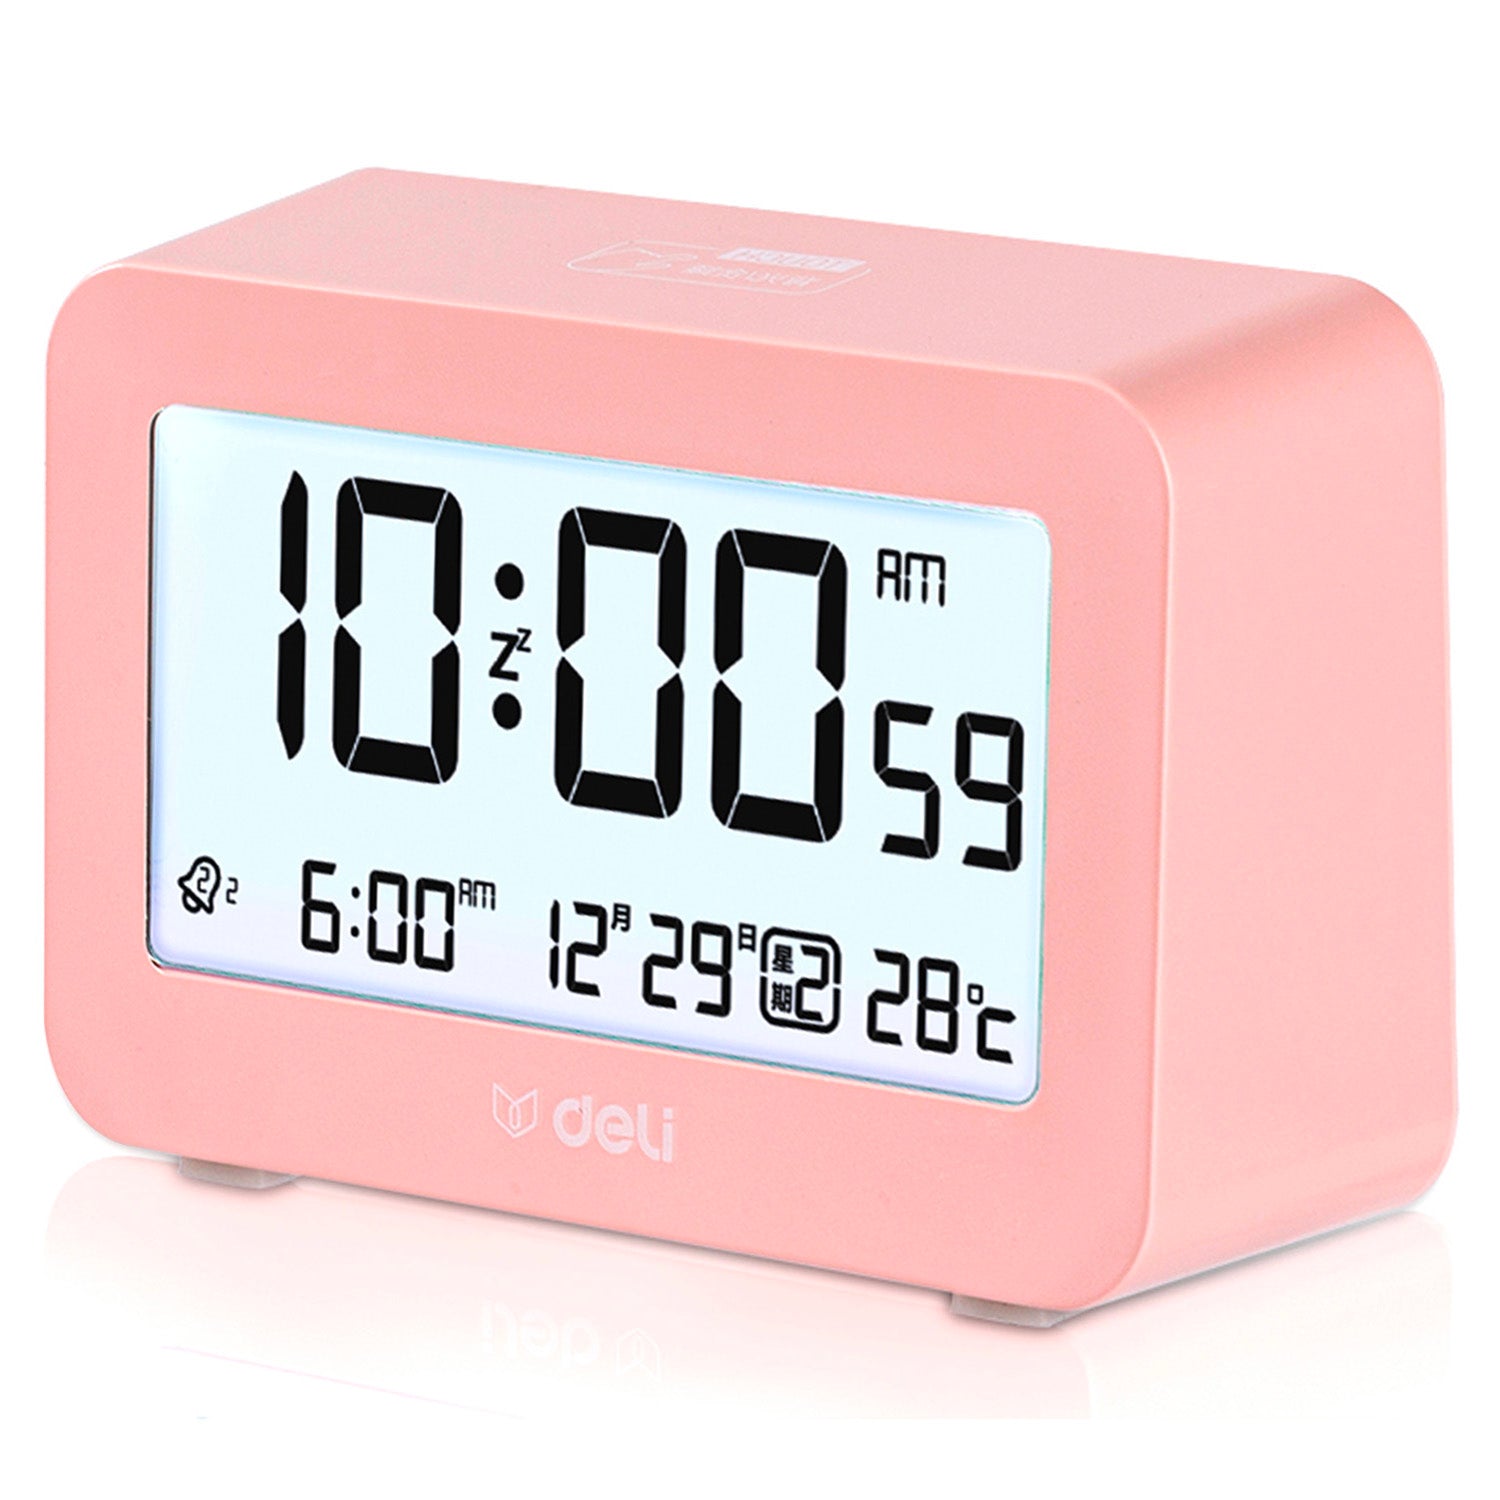 Sonic Mickey Mouse Pink Color Alarm Clock Analog Pink Clock Price in India  - Buy Sonic Mickey Mouse Pink Color Alarm Clock Analog Pink Clock online at